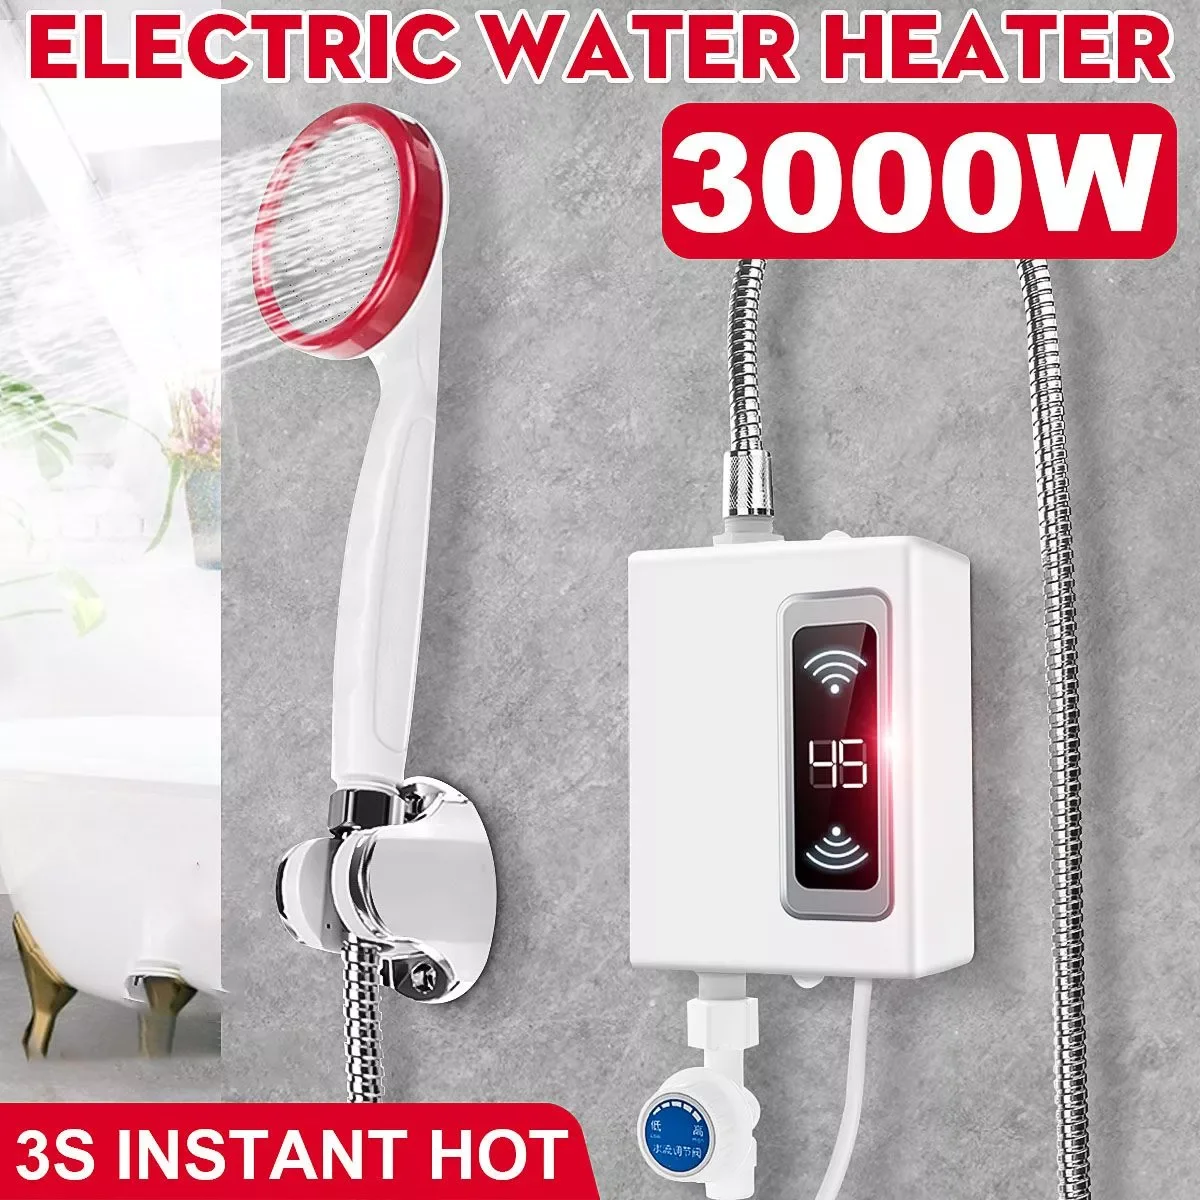 Enlarge 3000W 220V Water Heater Bathroom Kitchen Instant Electric Hot Water Heater Tap Temperature Display Faucet Shower Tankless Tap